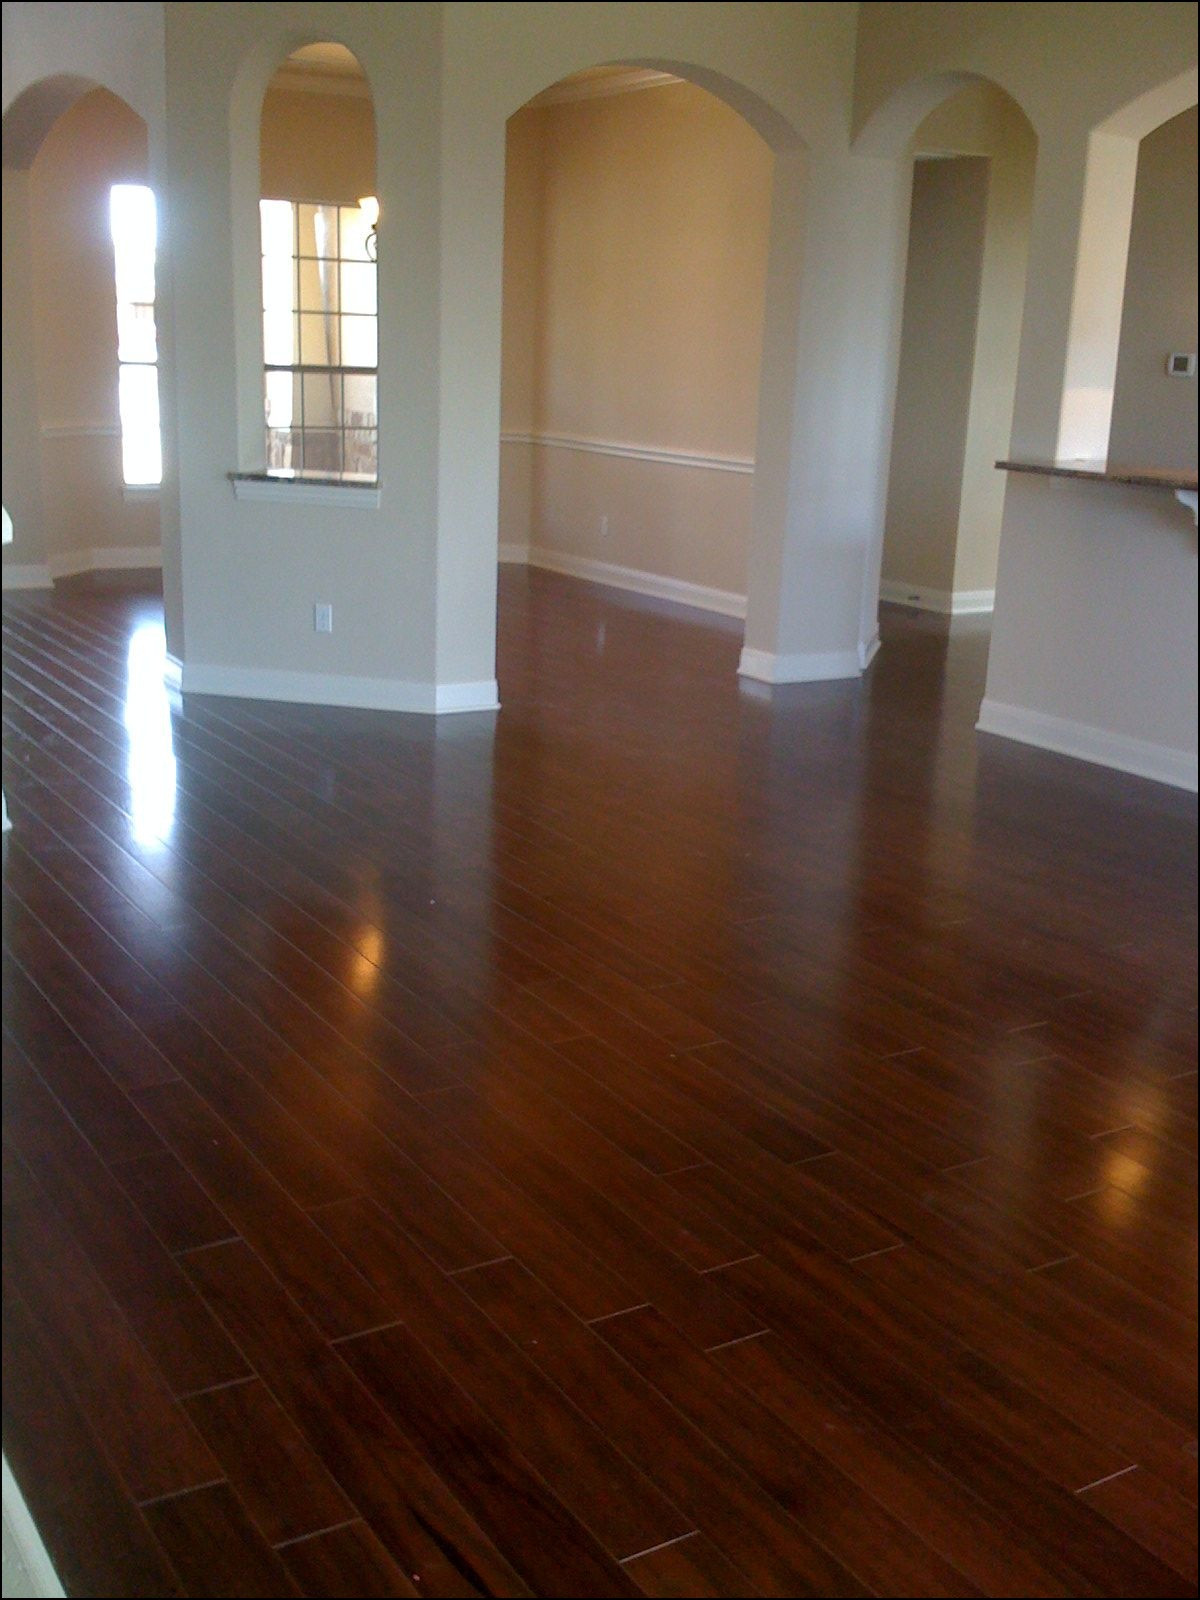 18 Unique Kahrs Engineered Hardwood Flooring Reviews 2023 free download kahrs engineered hardwood flooring reviews of hardwood flooring suppliers france flooring ideas in hardwood flooring pictures in homes galerie dark wood floors but all i can think of is